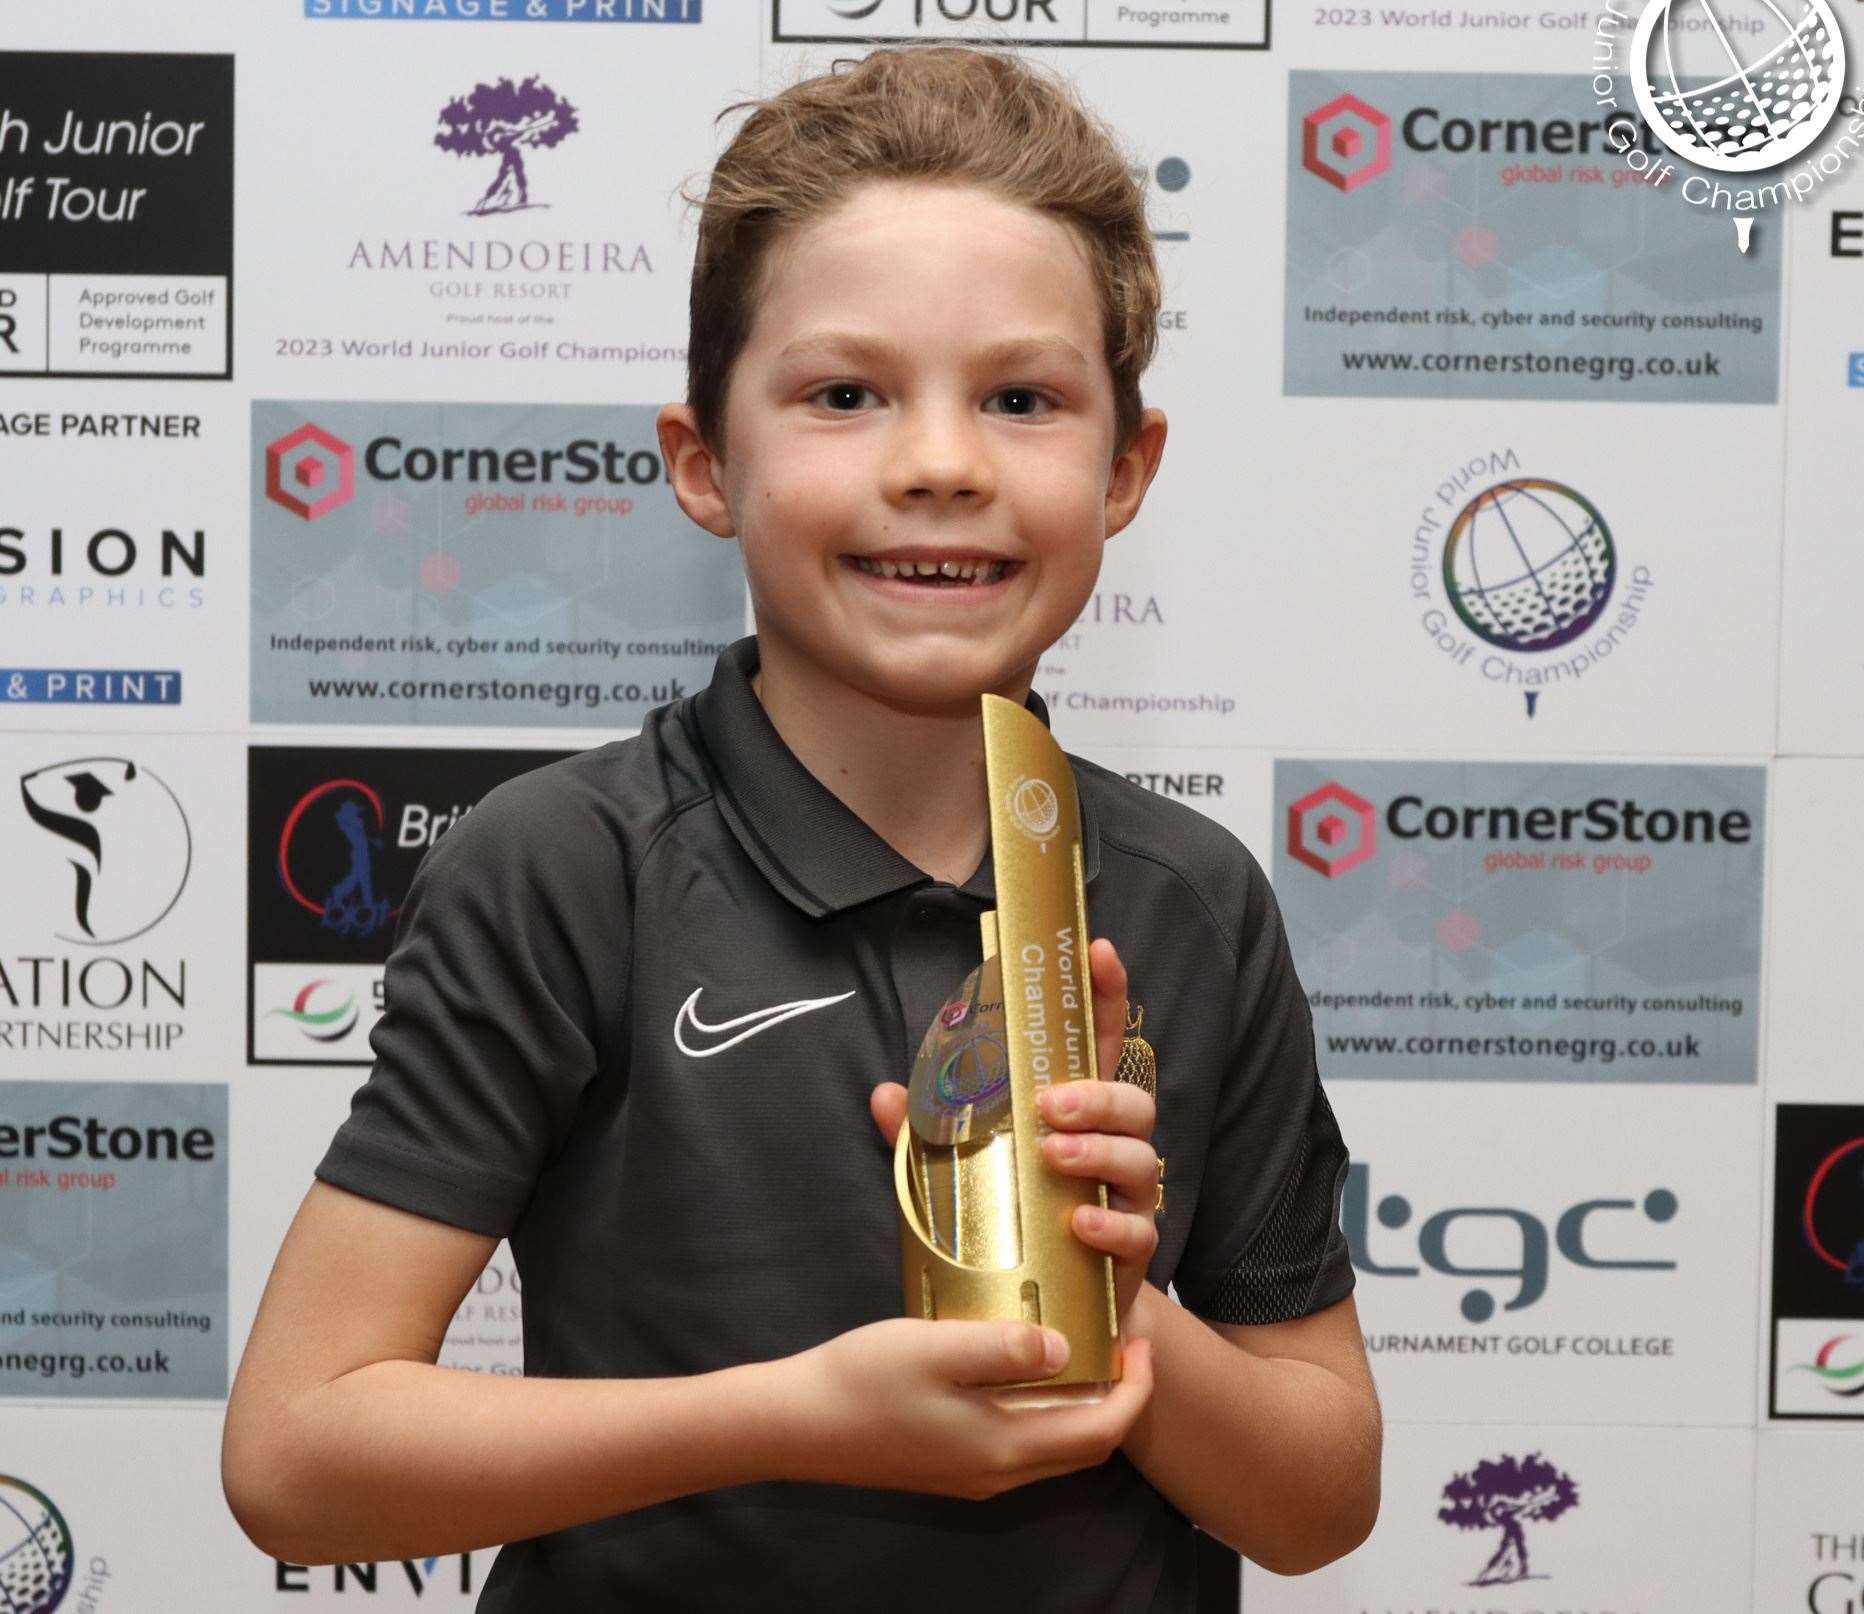 Prince's Golf Club's Elijah Gibbons won in the under-7 category at the 2023 World Junior Golf Championship at the Amendoeira resort in the Algarve, Portugal, with the event run by the British Junior Golf Tour